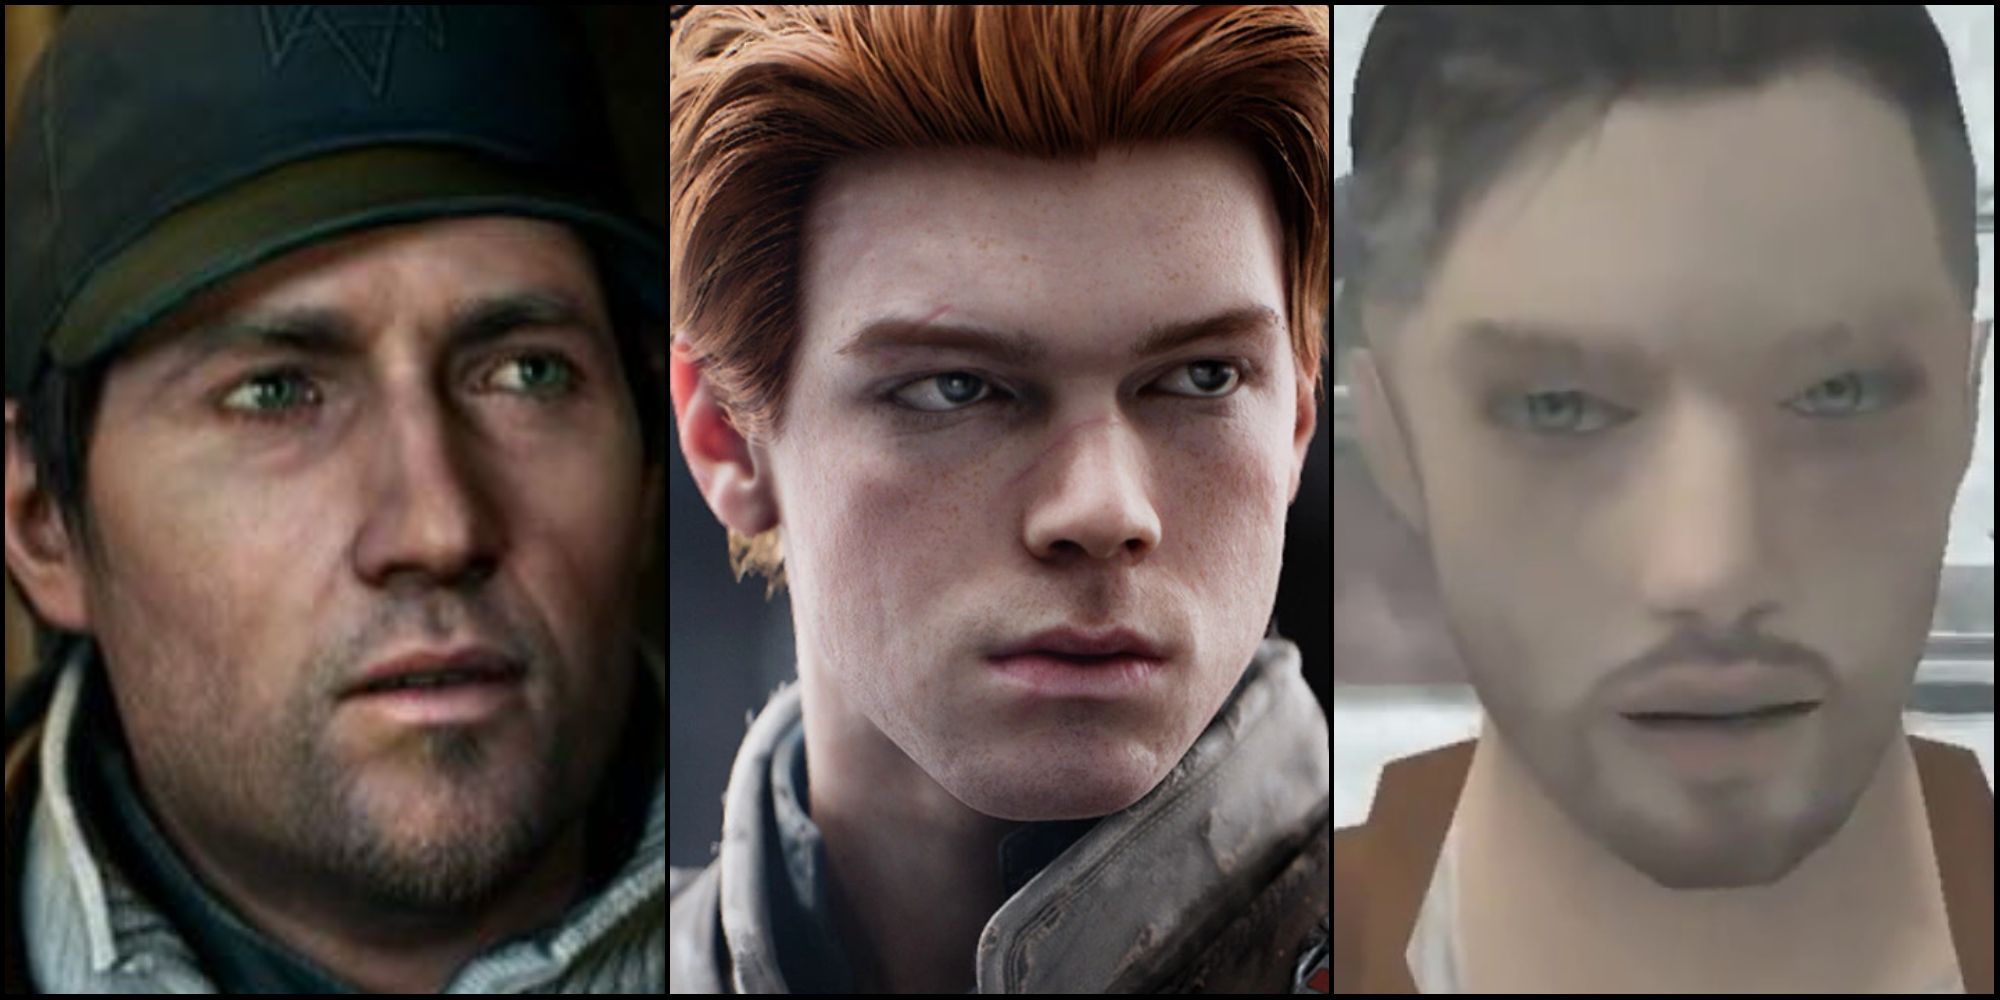 Boring white male video game protagonists Aiden Pearce, Kal Cestis, and Lucas Kane all staring off into space with open mouths